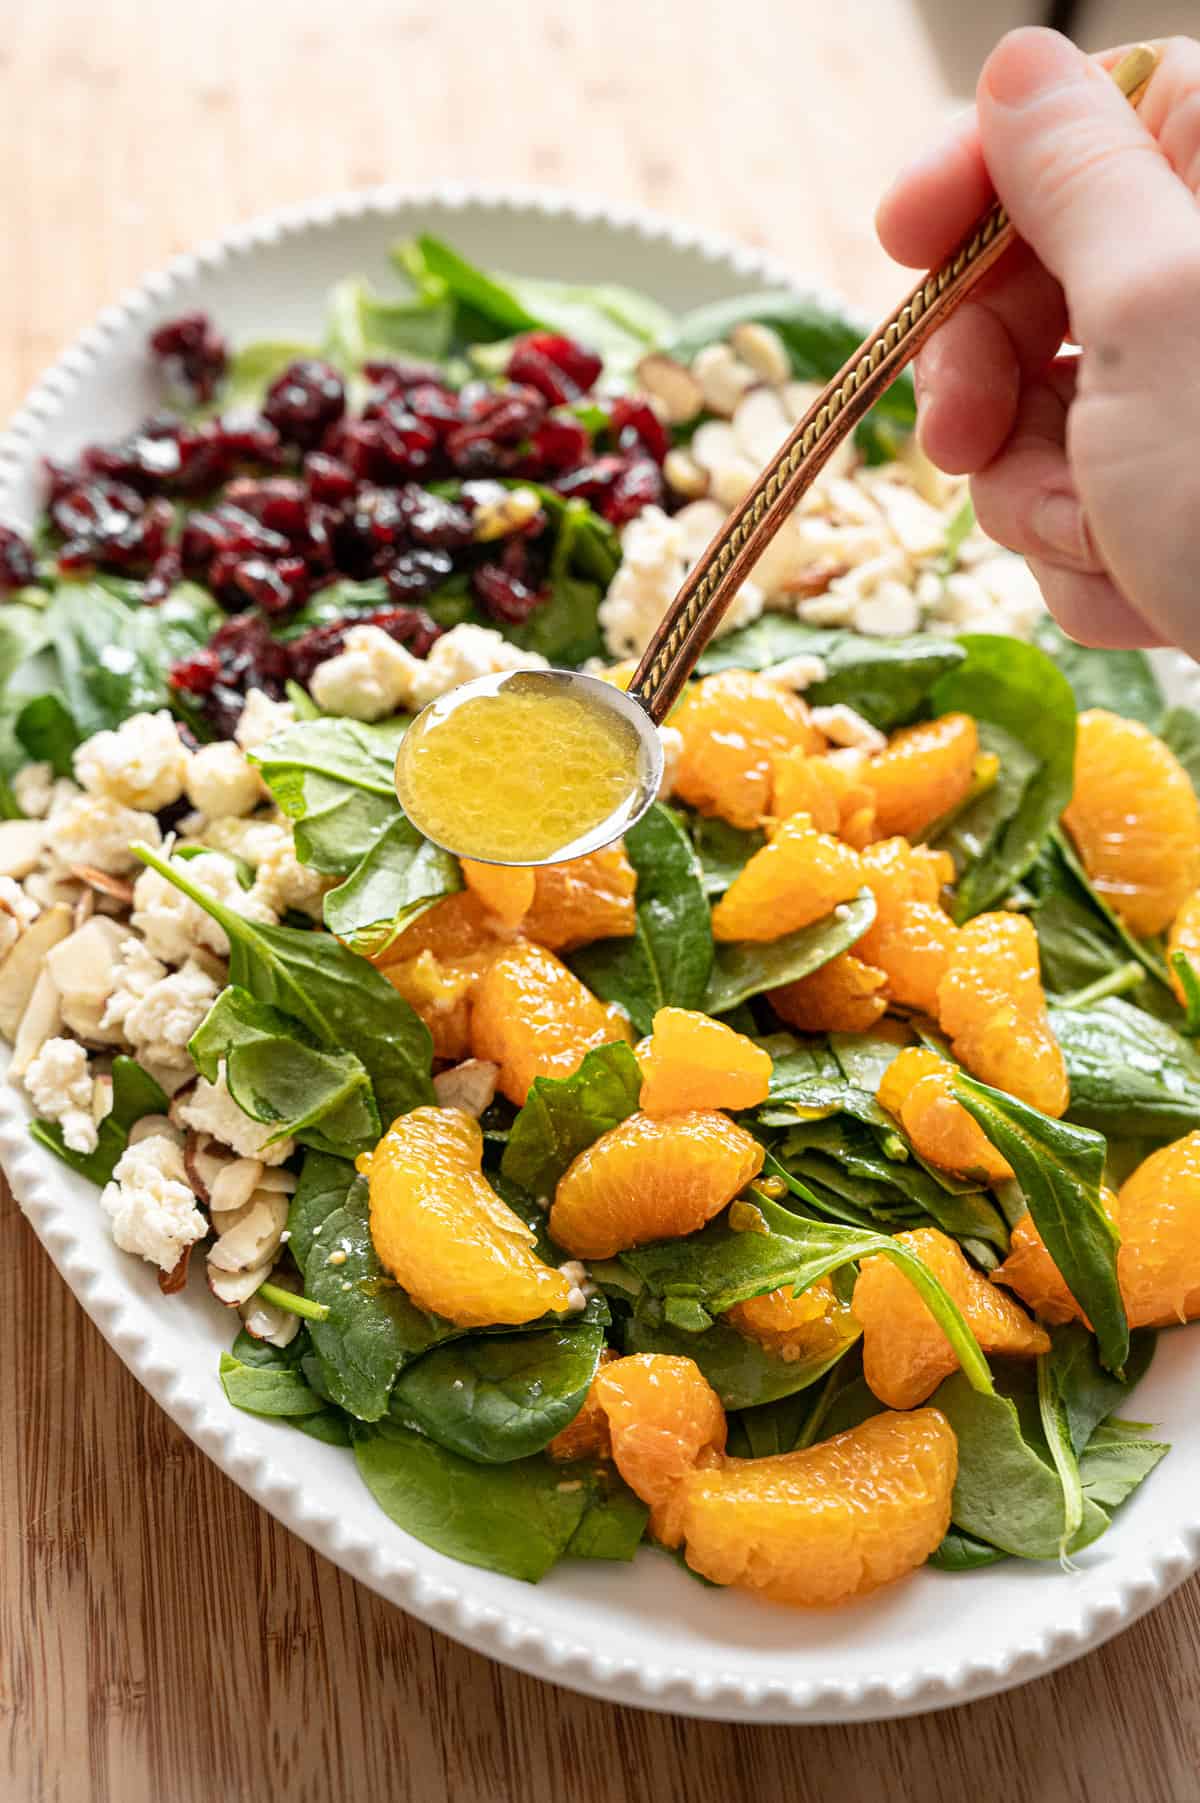 Creamy citrus dressing being ladled onto Mandarin Orange Spinach Salad with sliced almonds, dried cranberries, and feta cheese on it.